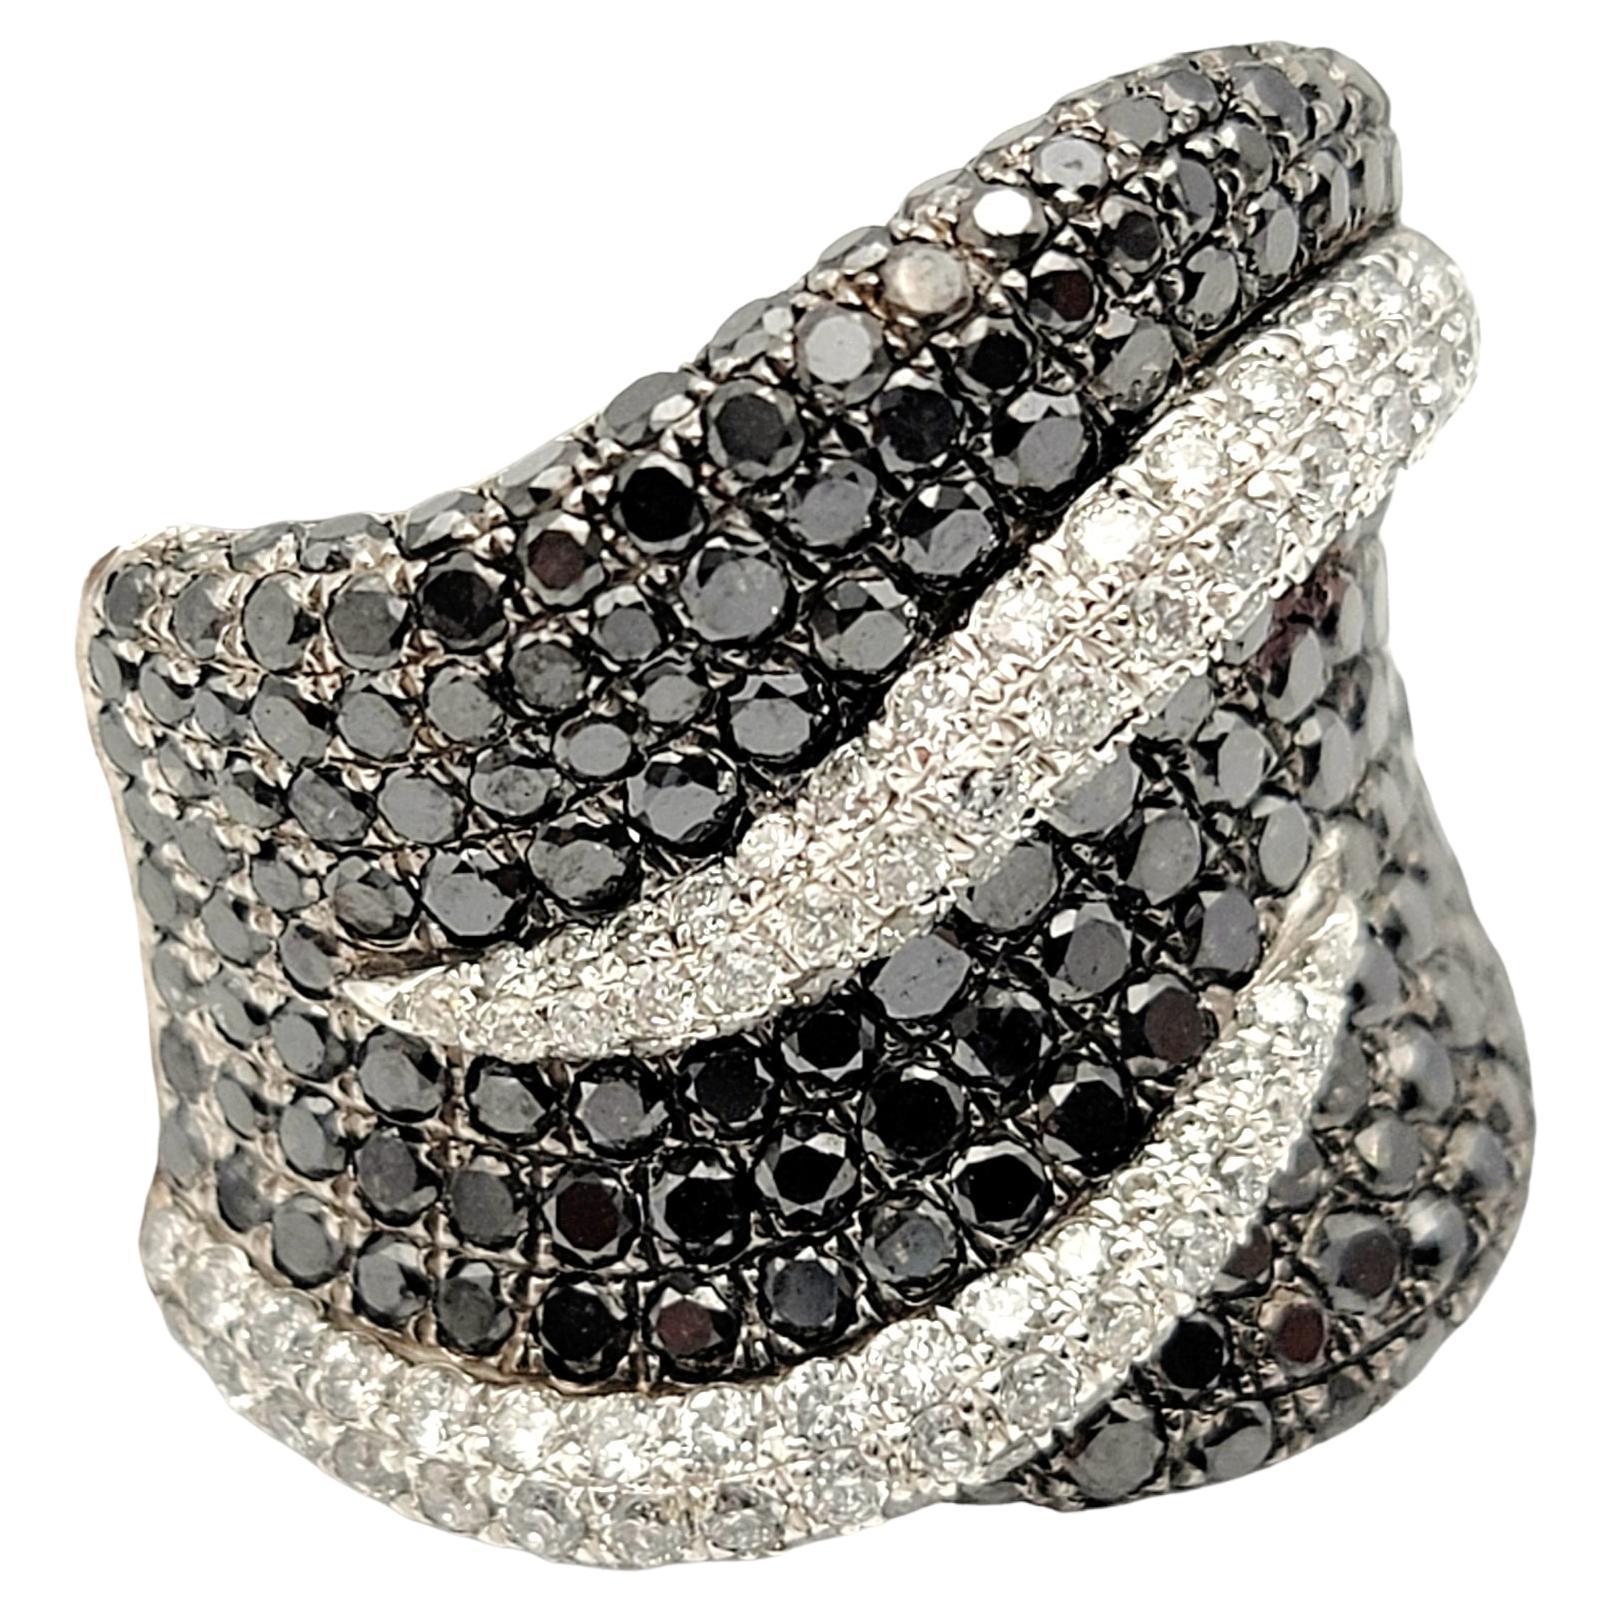 Ring size: 8

The dazzling diamond band ring exudes contemporary elegance. Bursting with sparkle, this black and white pave diamond piece offers beautiful contrast, modern design and chic sophistication. The wide style fills the finger with sparkle